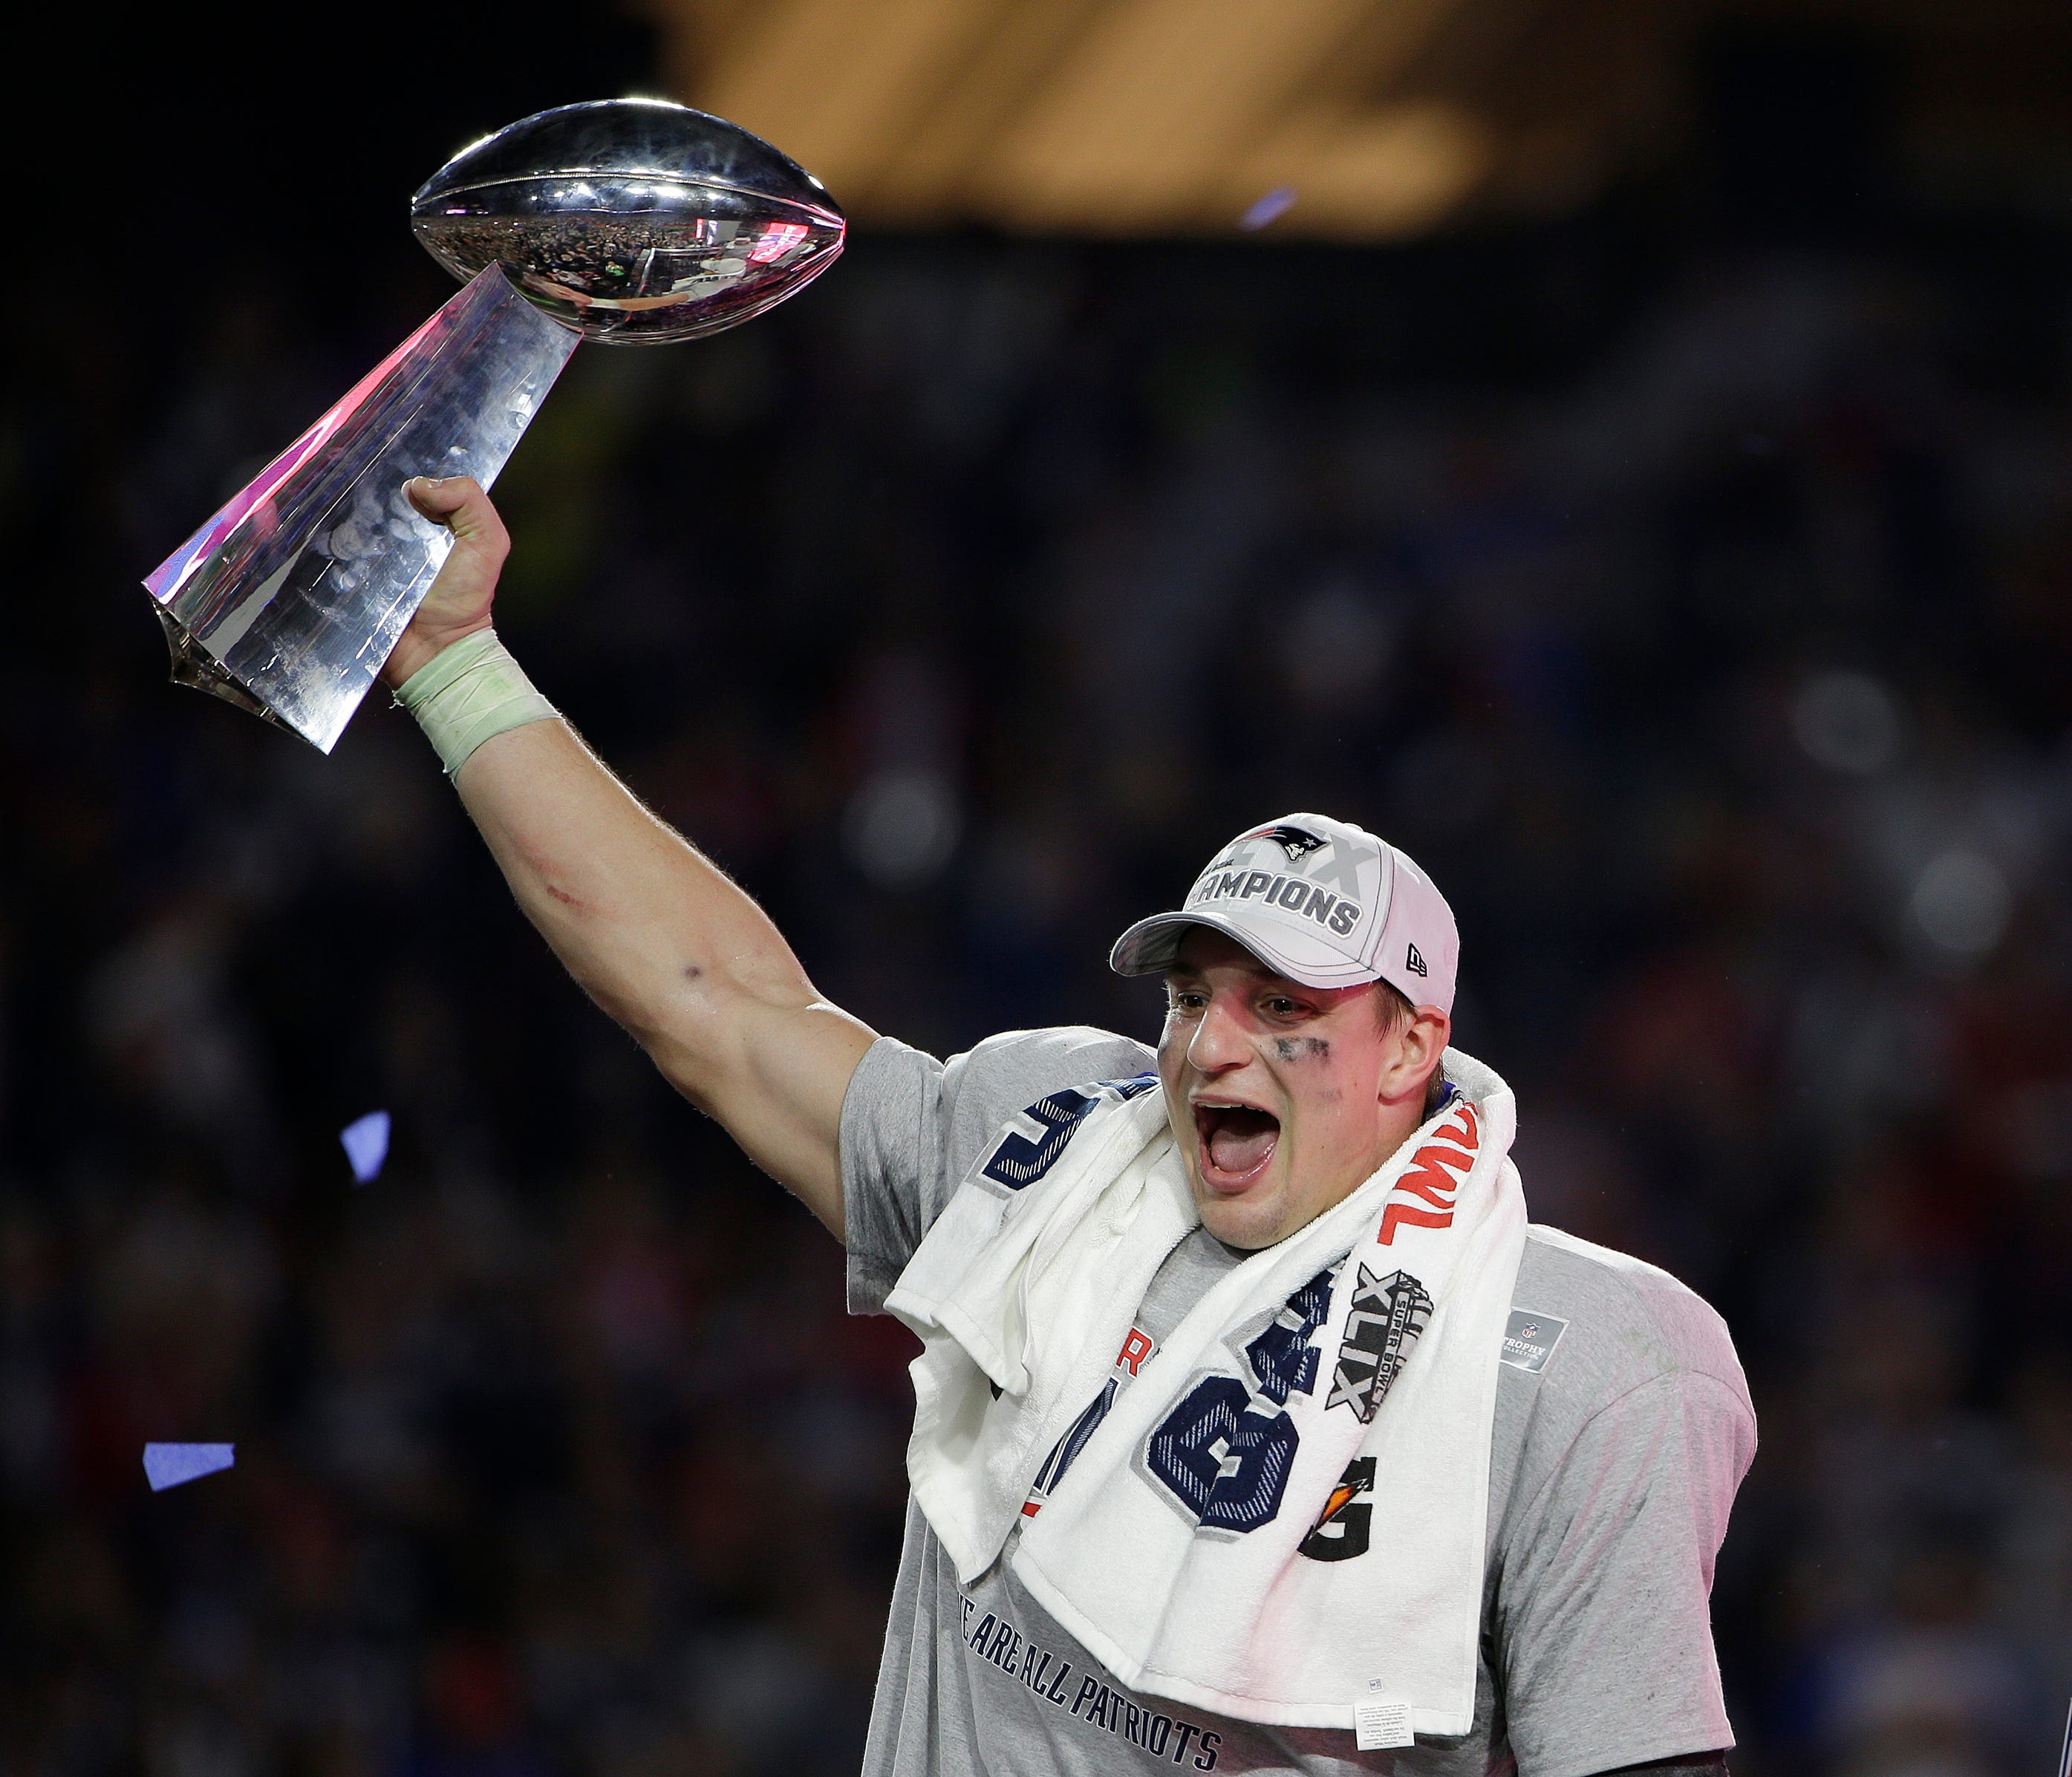 New England Patriots tight end Ron Gronkowski says he is retiring from the NFL after nine seasons. Gronkowski announced his decision via a post on Instagram Sunday, saying that a few months shy of this 30th birthday and it's time to move forward and m